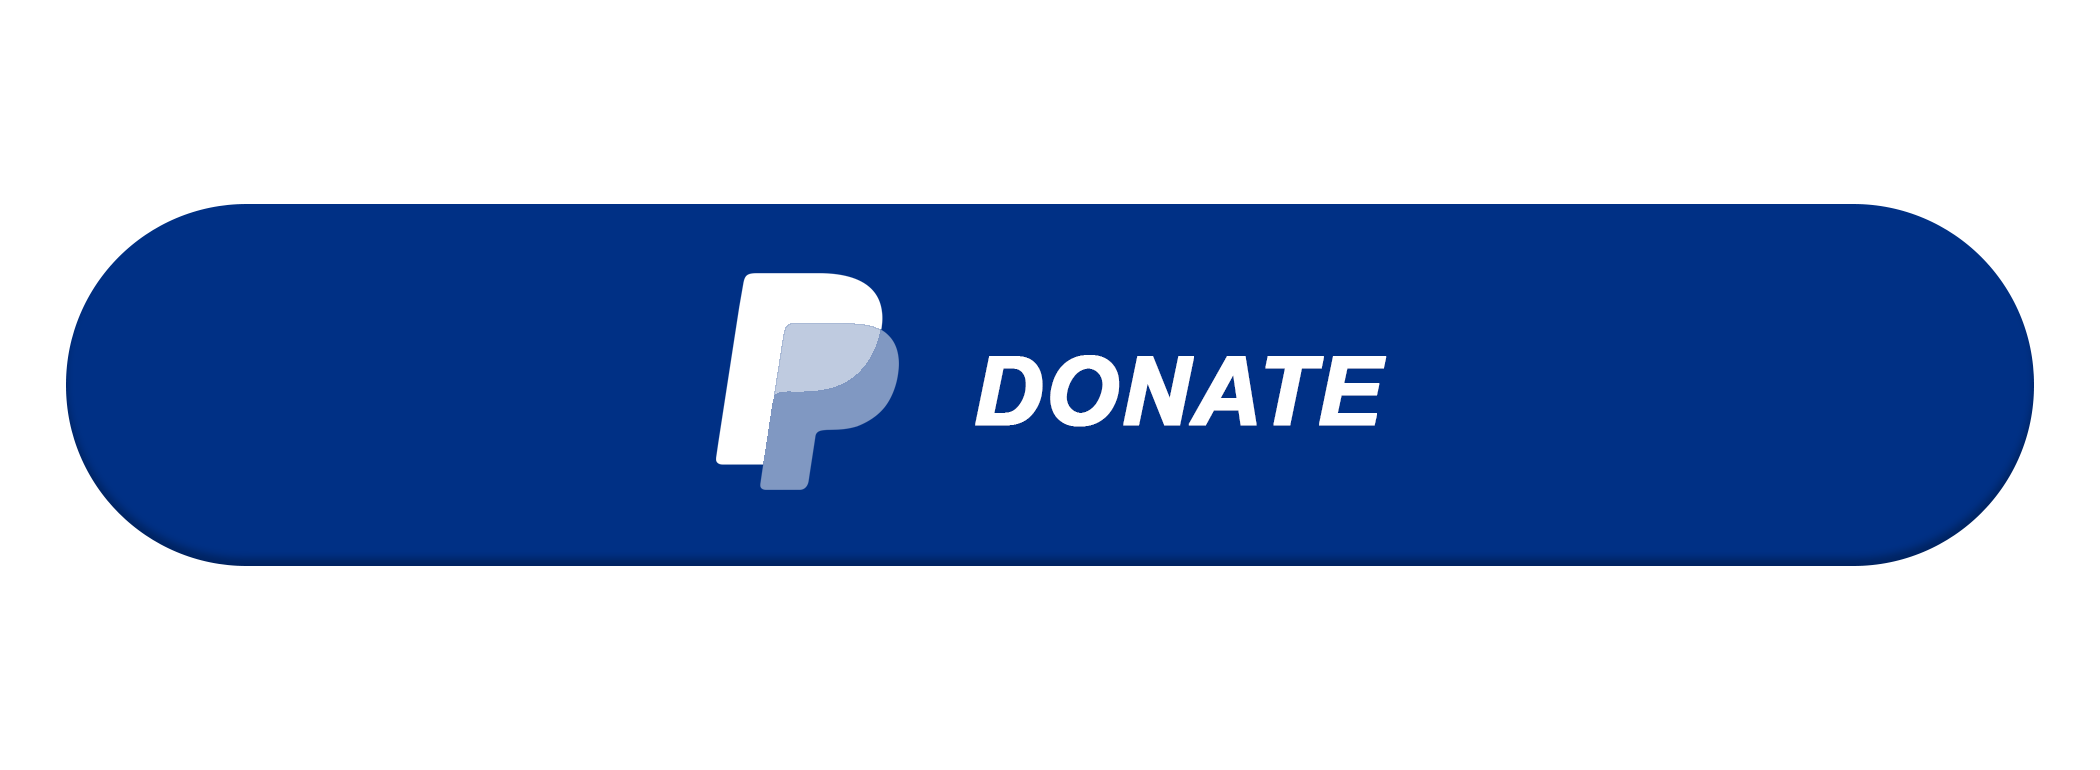 [CITYPNG.COM]PayPal Donate Blue Button HD PNG - 2100x770